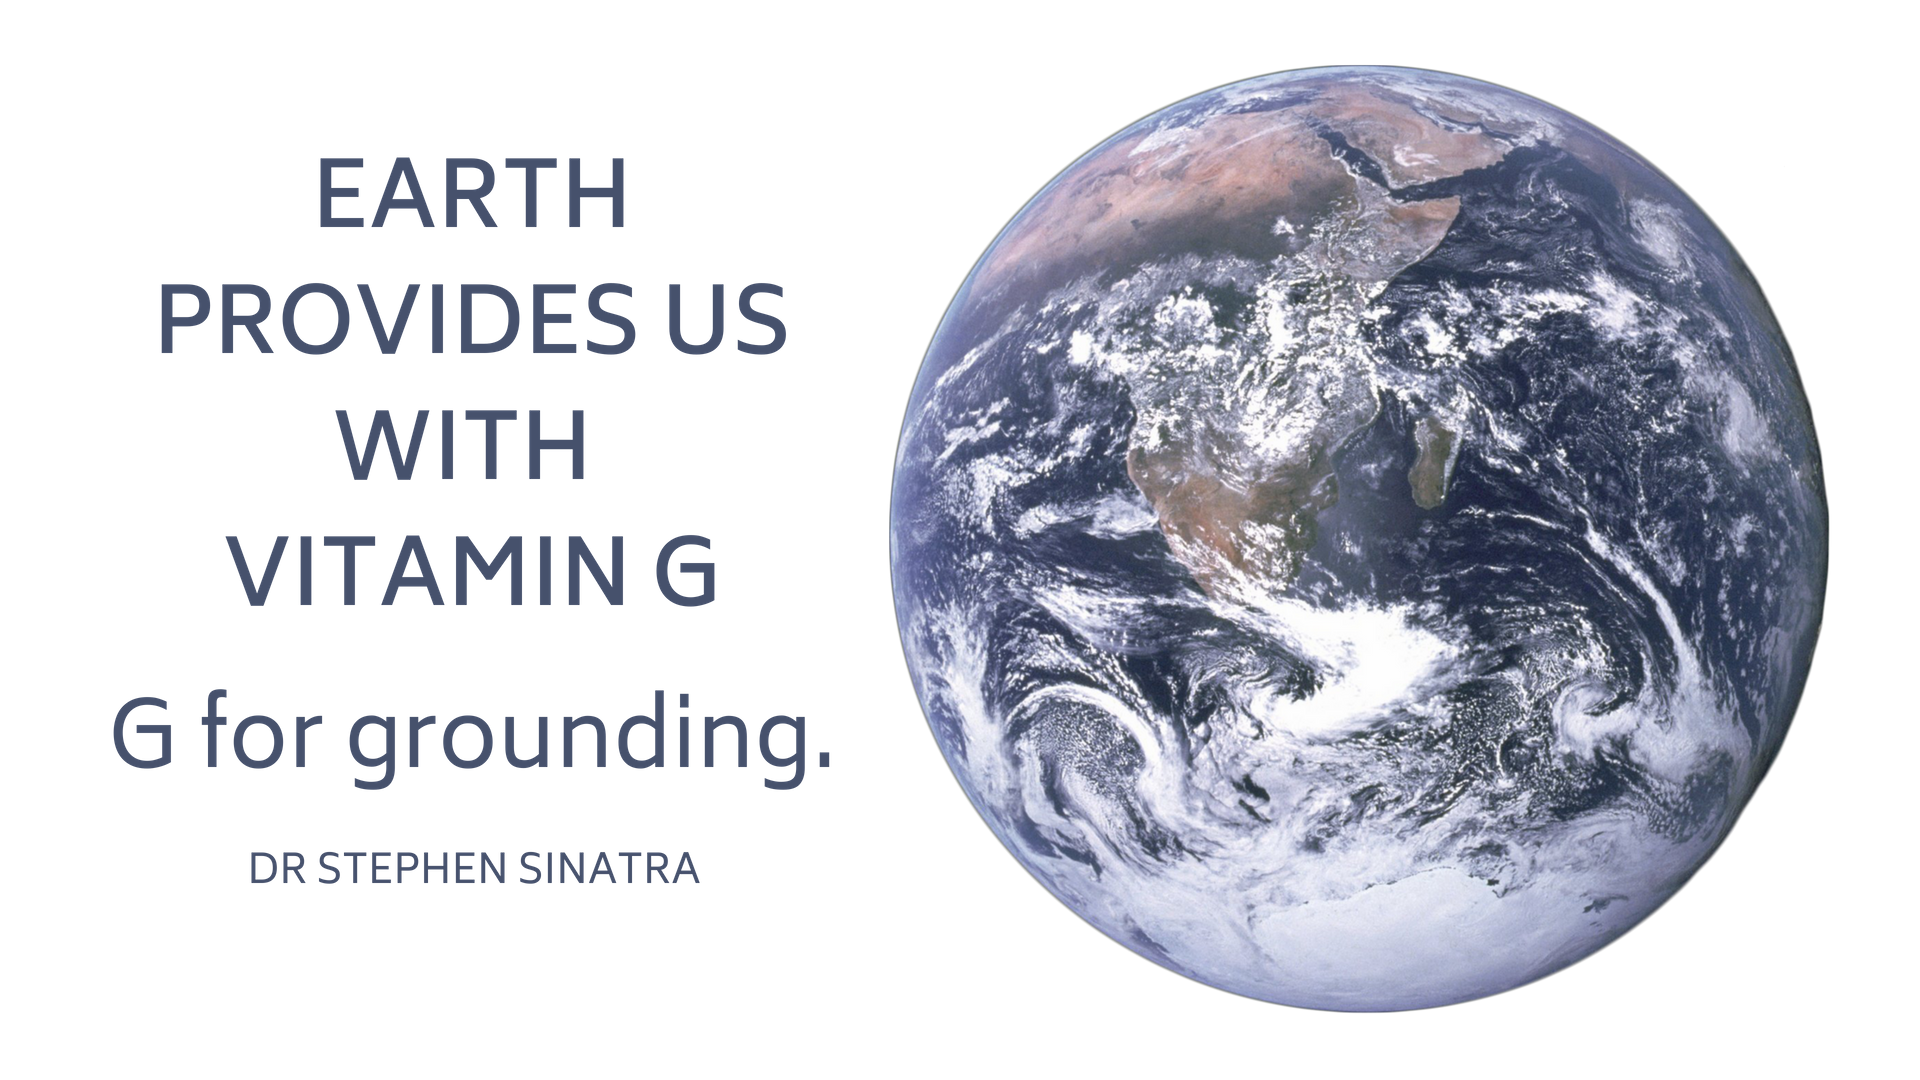 The Earth provides us with Vitamin G for Grounding